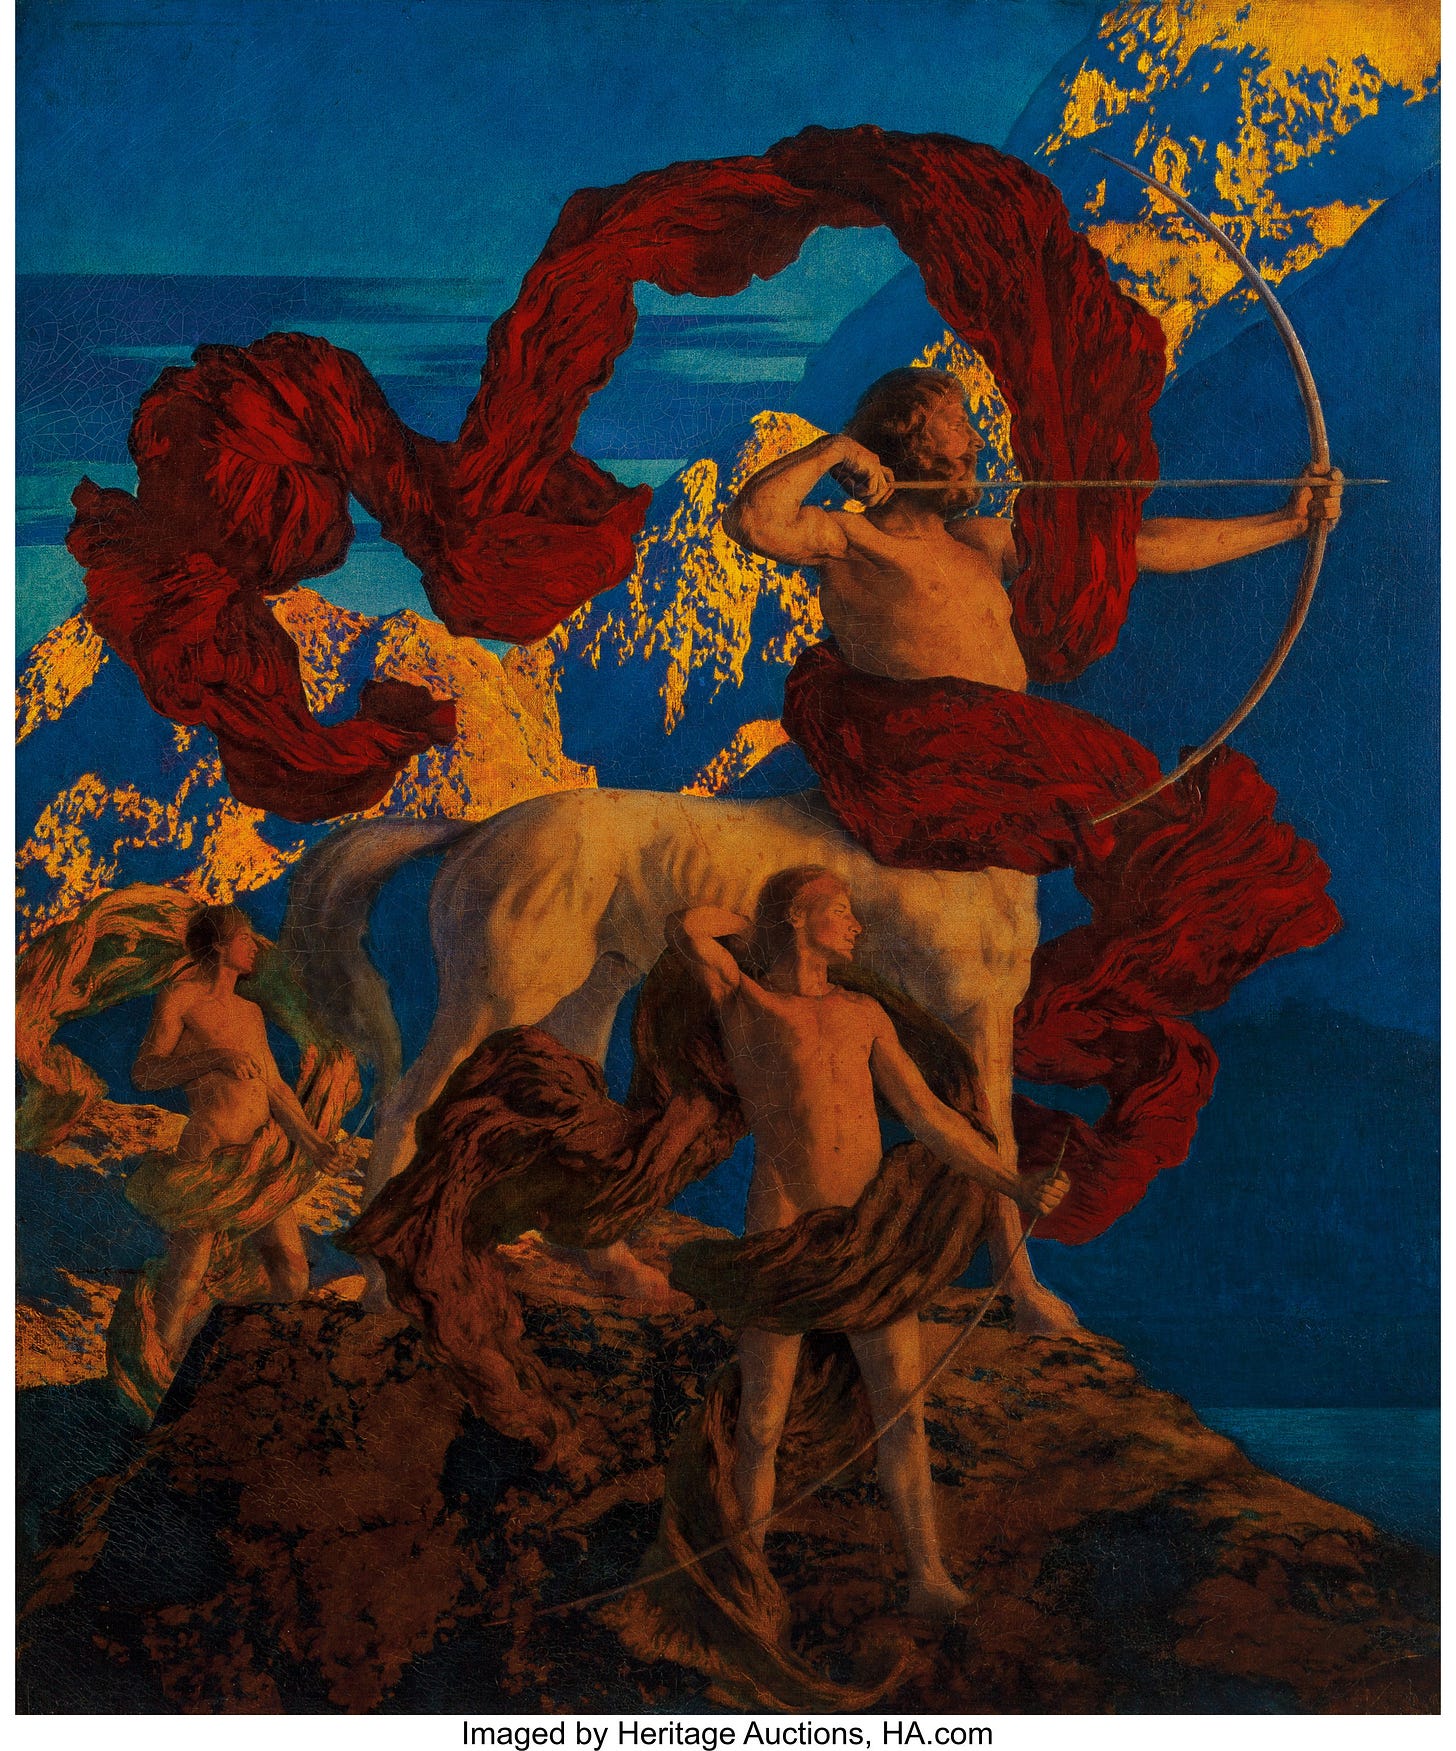 Maxfield Parrish Paintings for Sale | Value Guide | Heritage Auctions